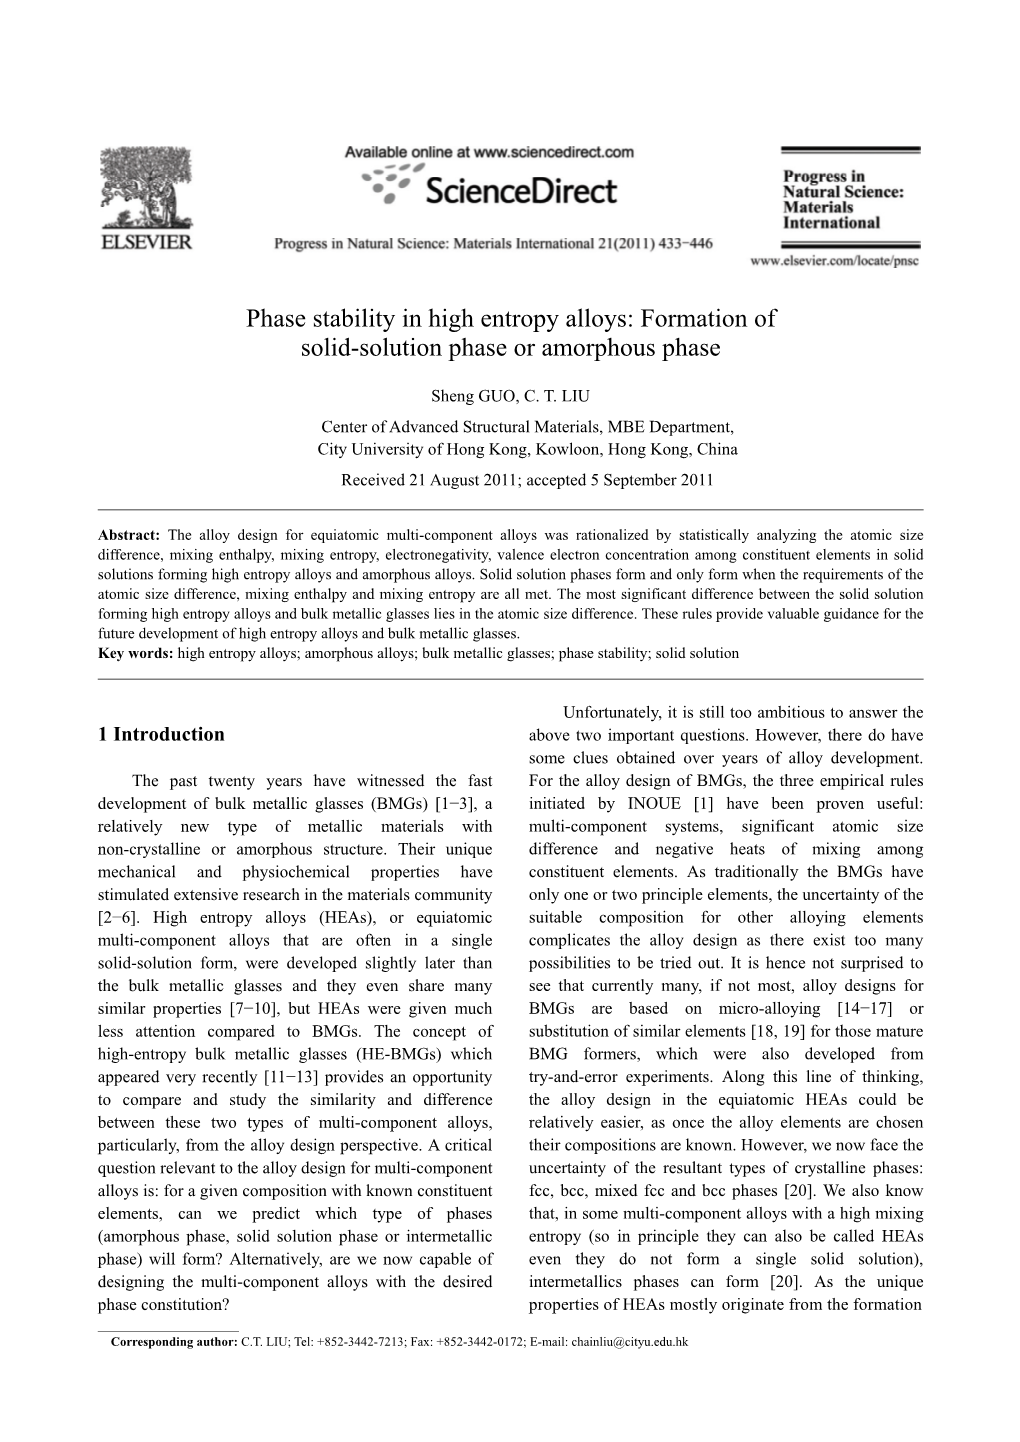 Phase Stability in High Entropy Alloys: Formation of Solid-Solution Phase Or Amorphous Phase